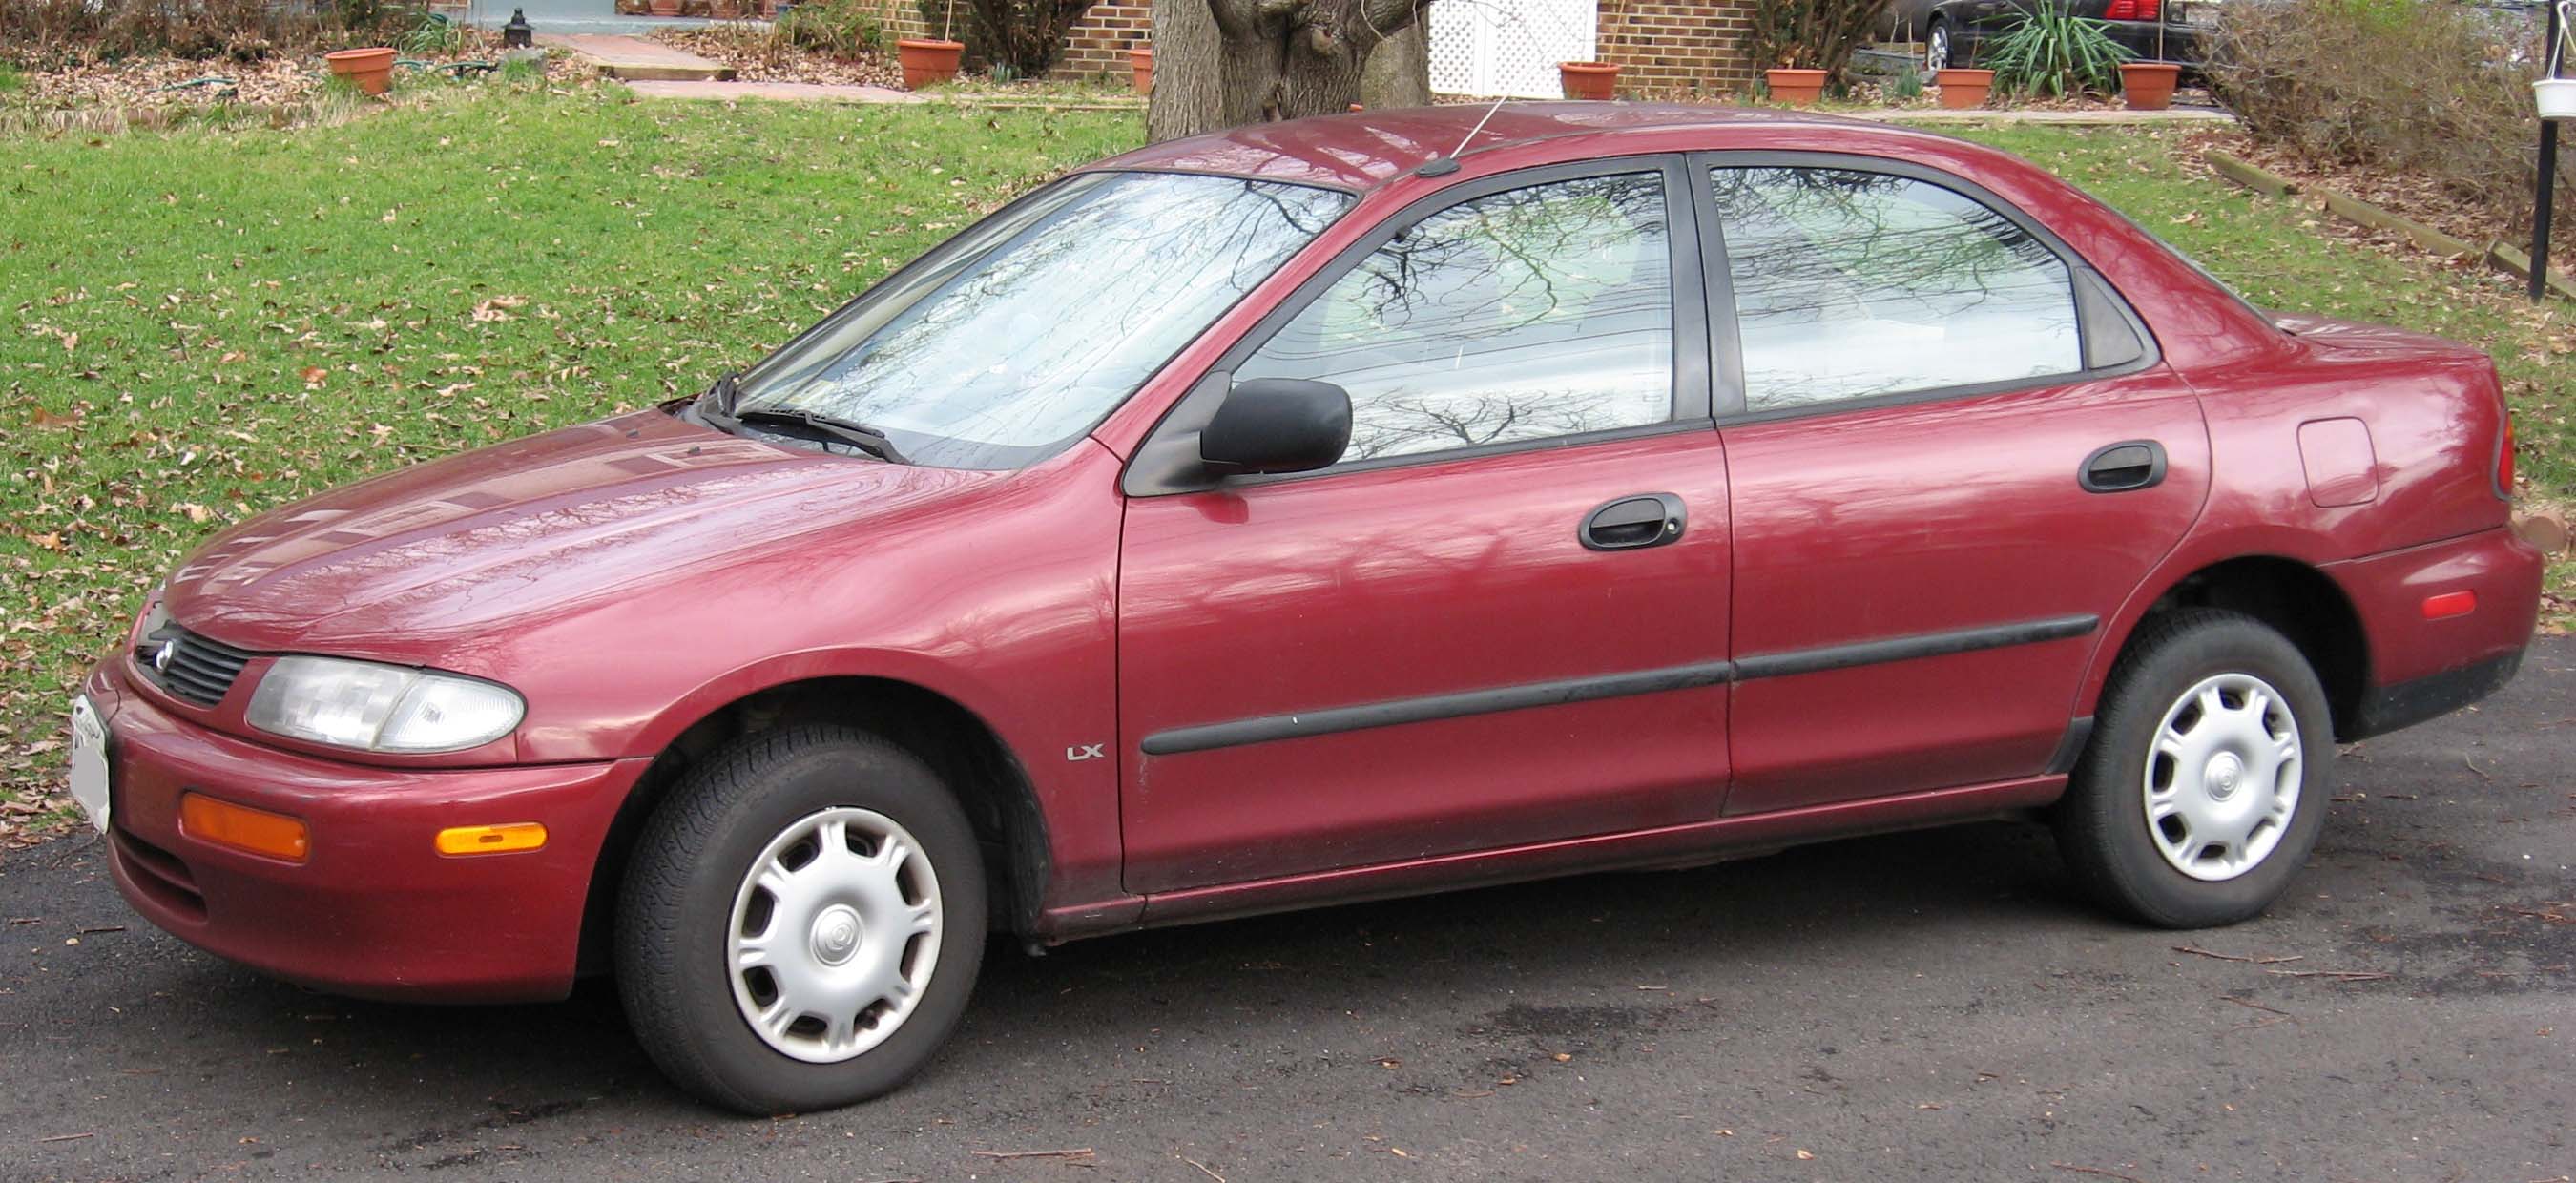 Mazda Protege 1996 Review, Amazing Pictures and Images Look at the car